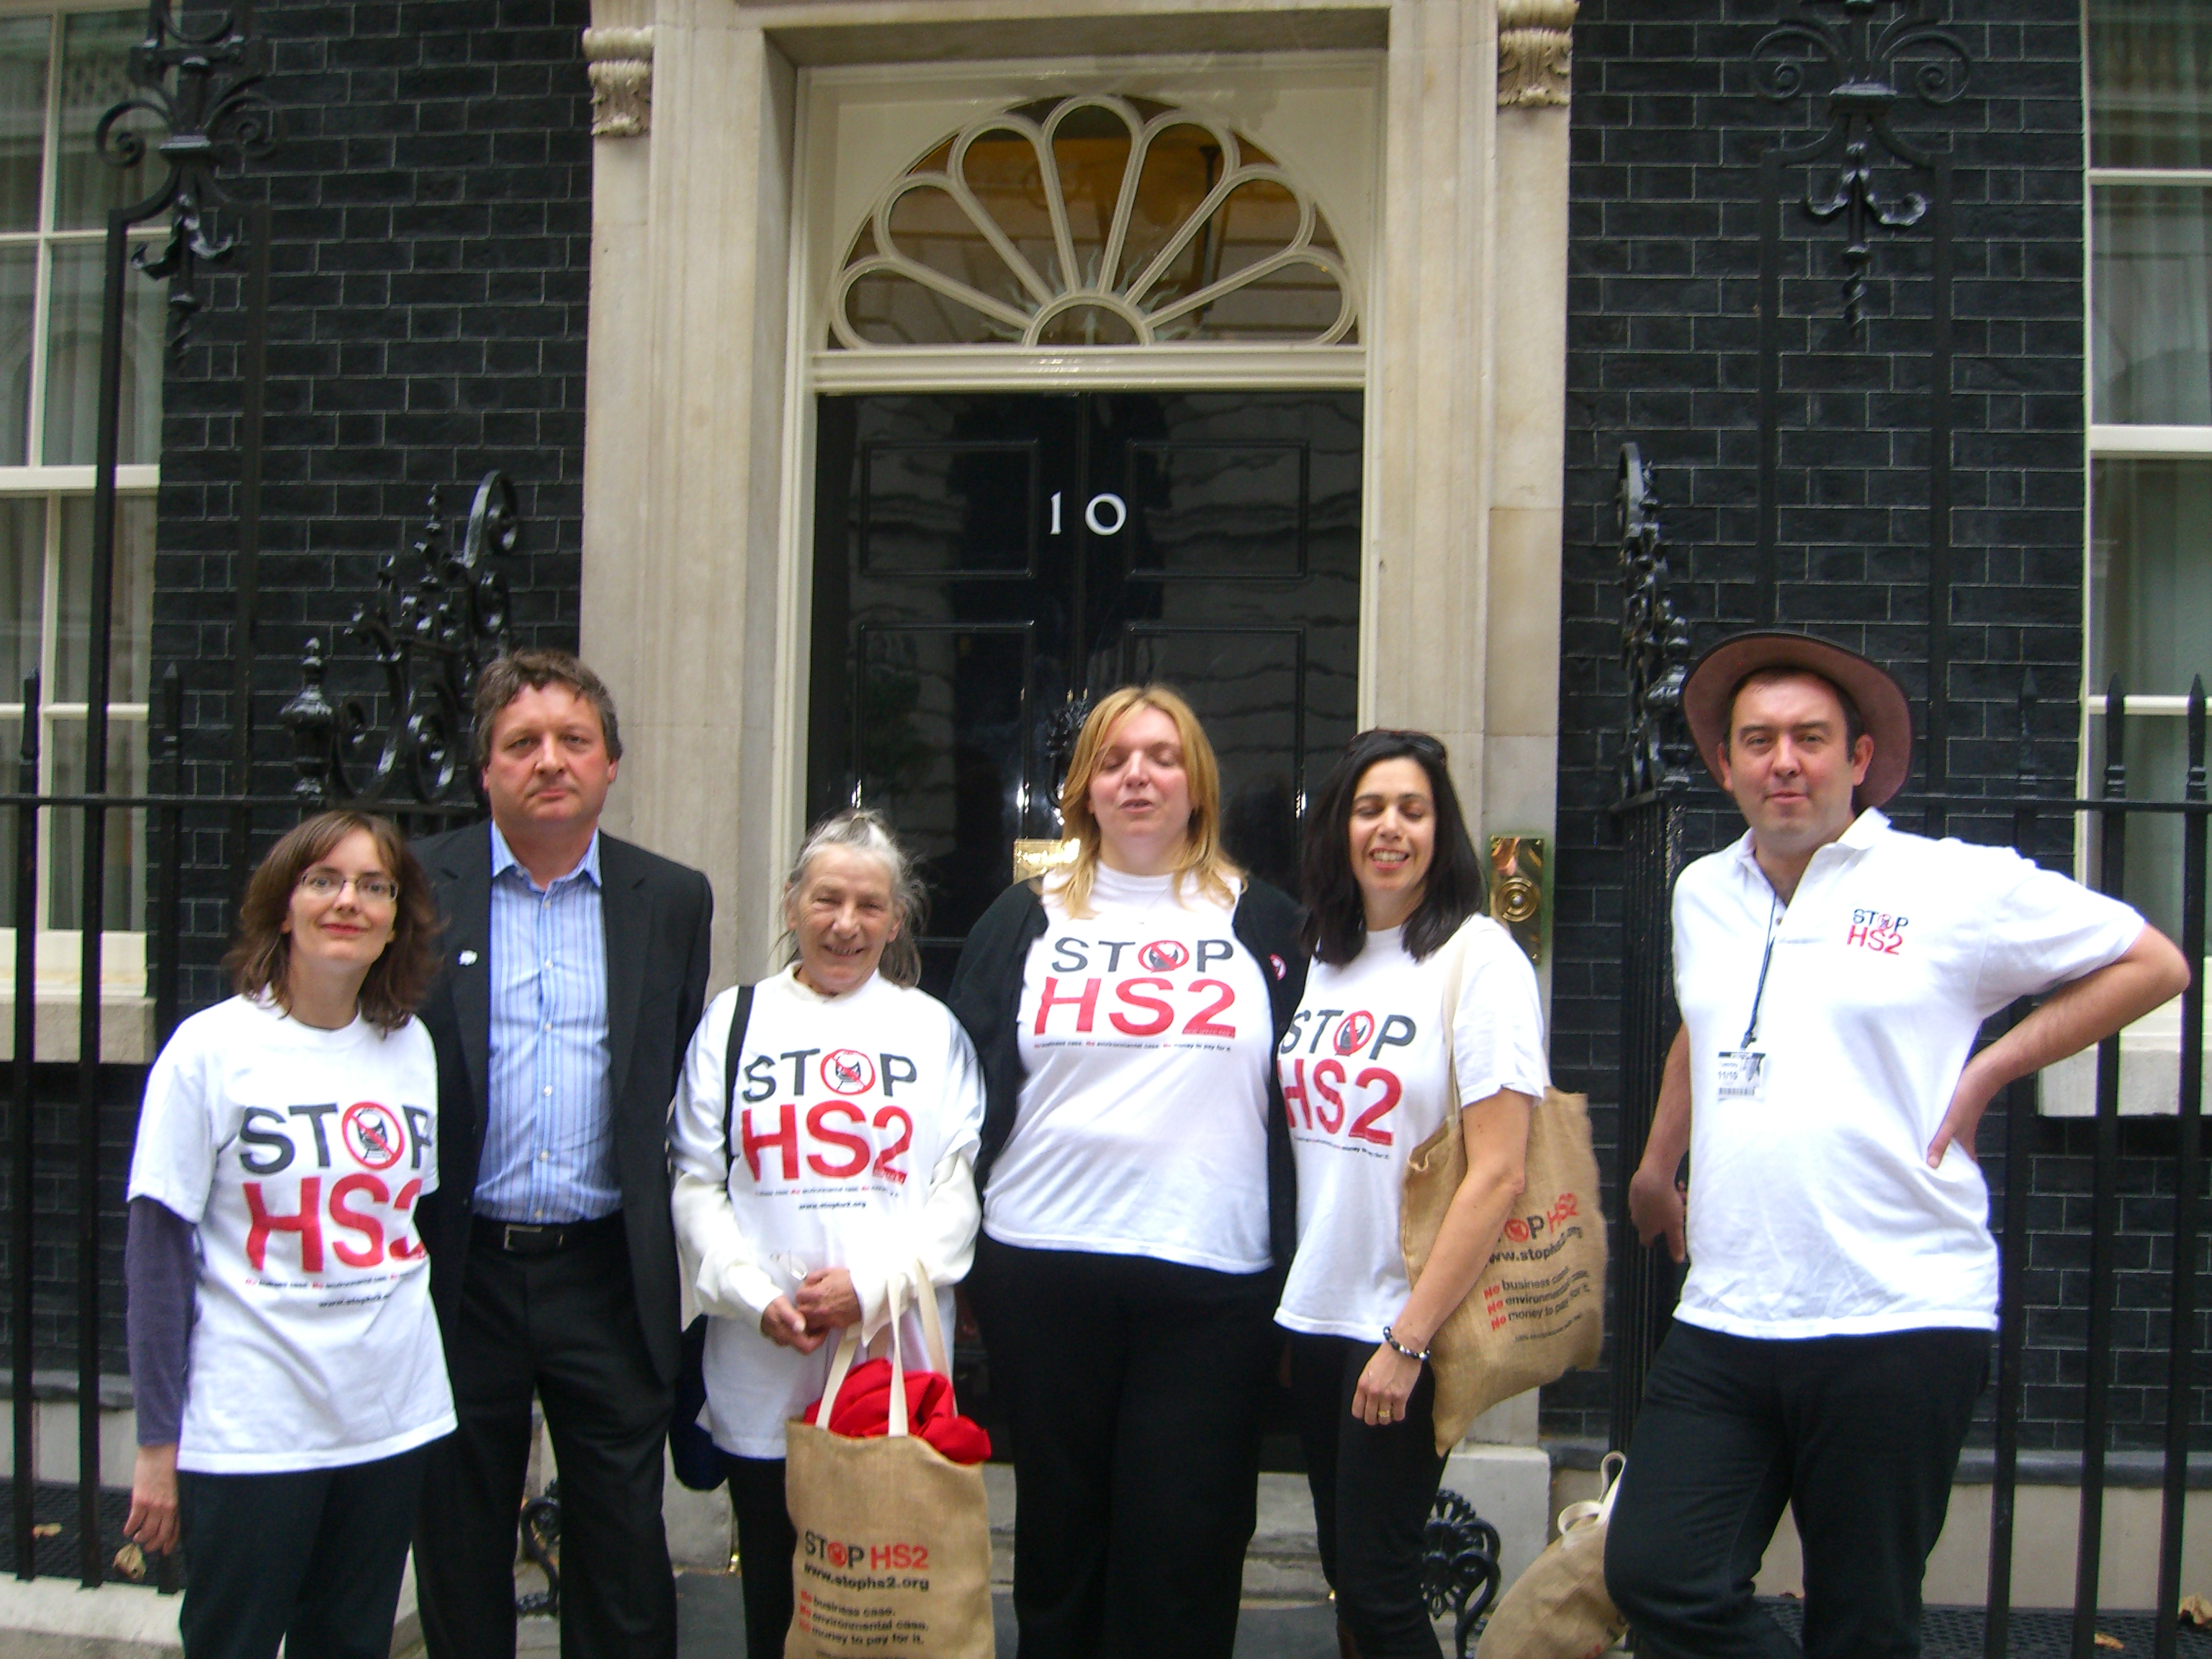 Stop Hs2 campaigners outside 10 Downing Street